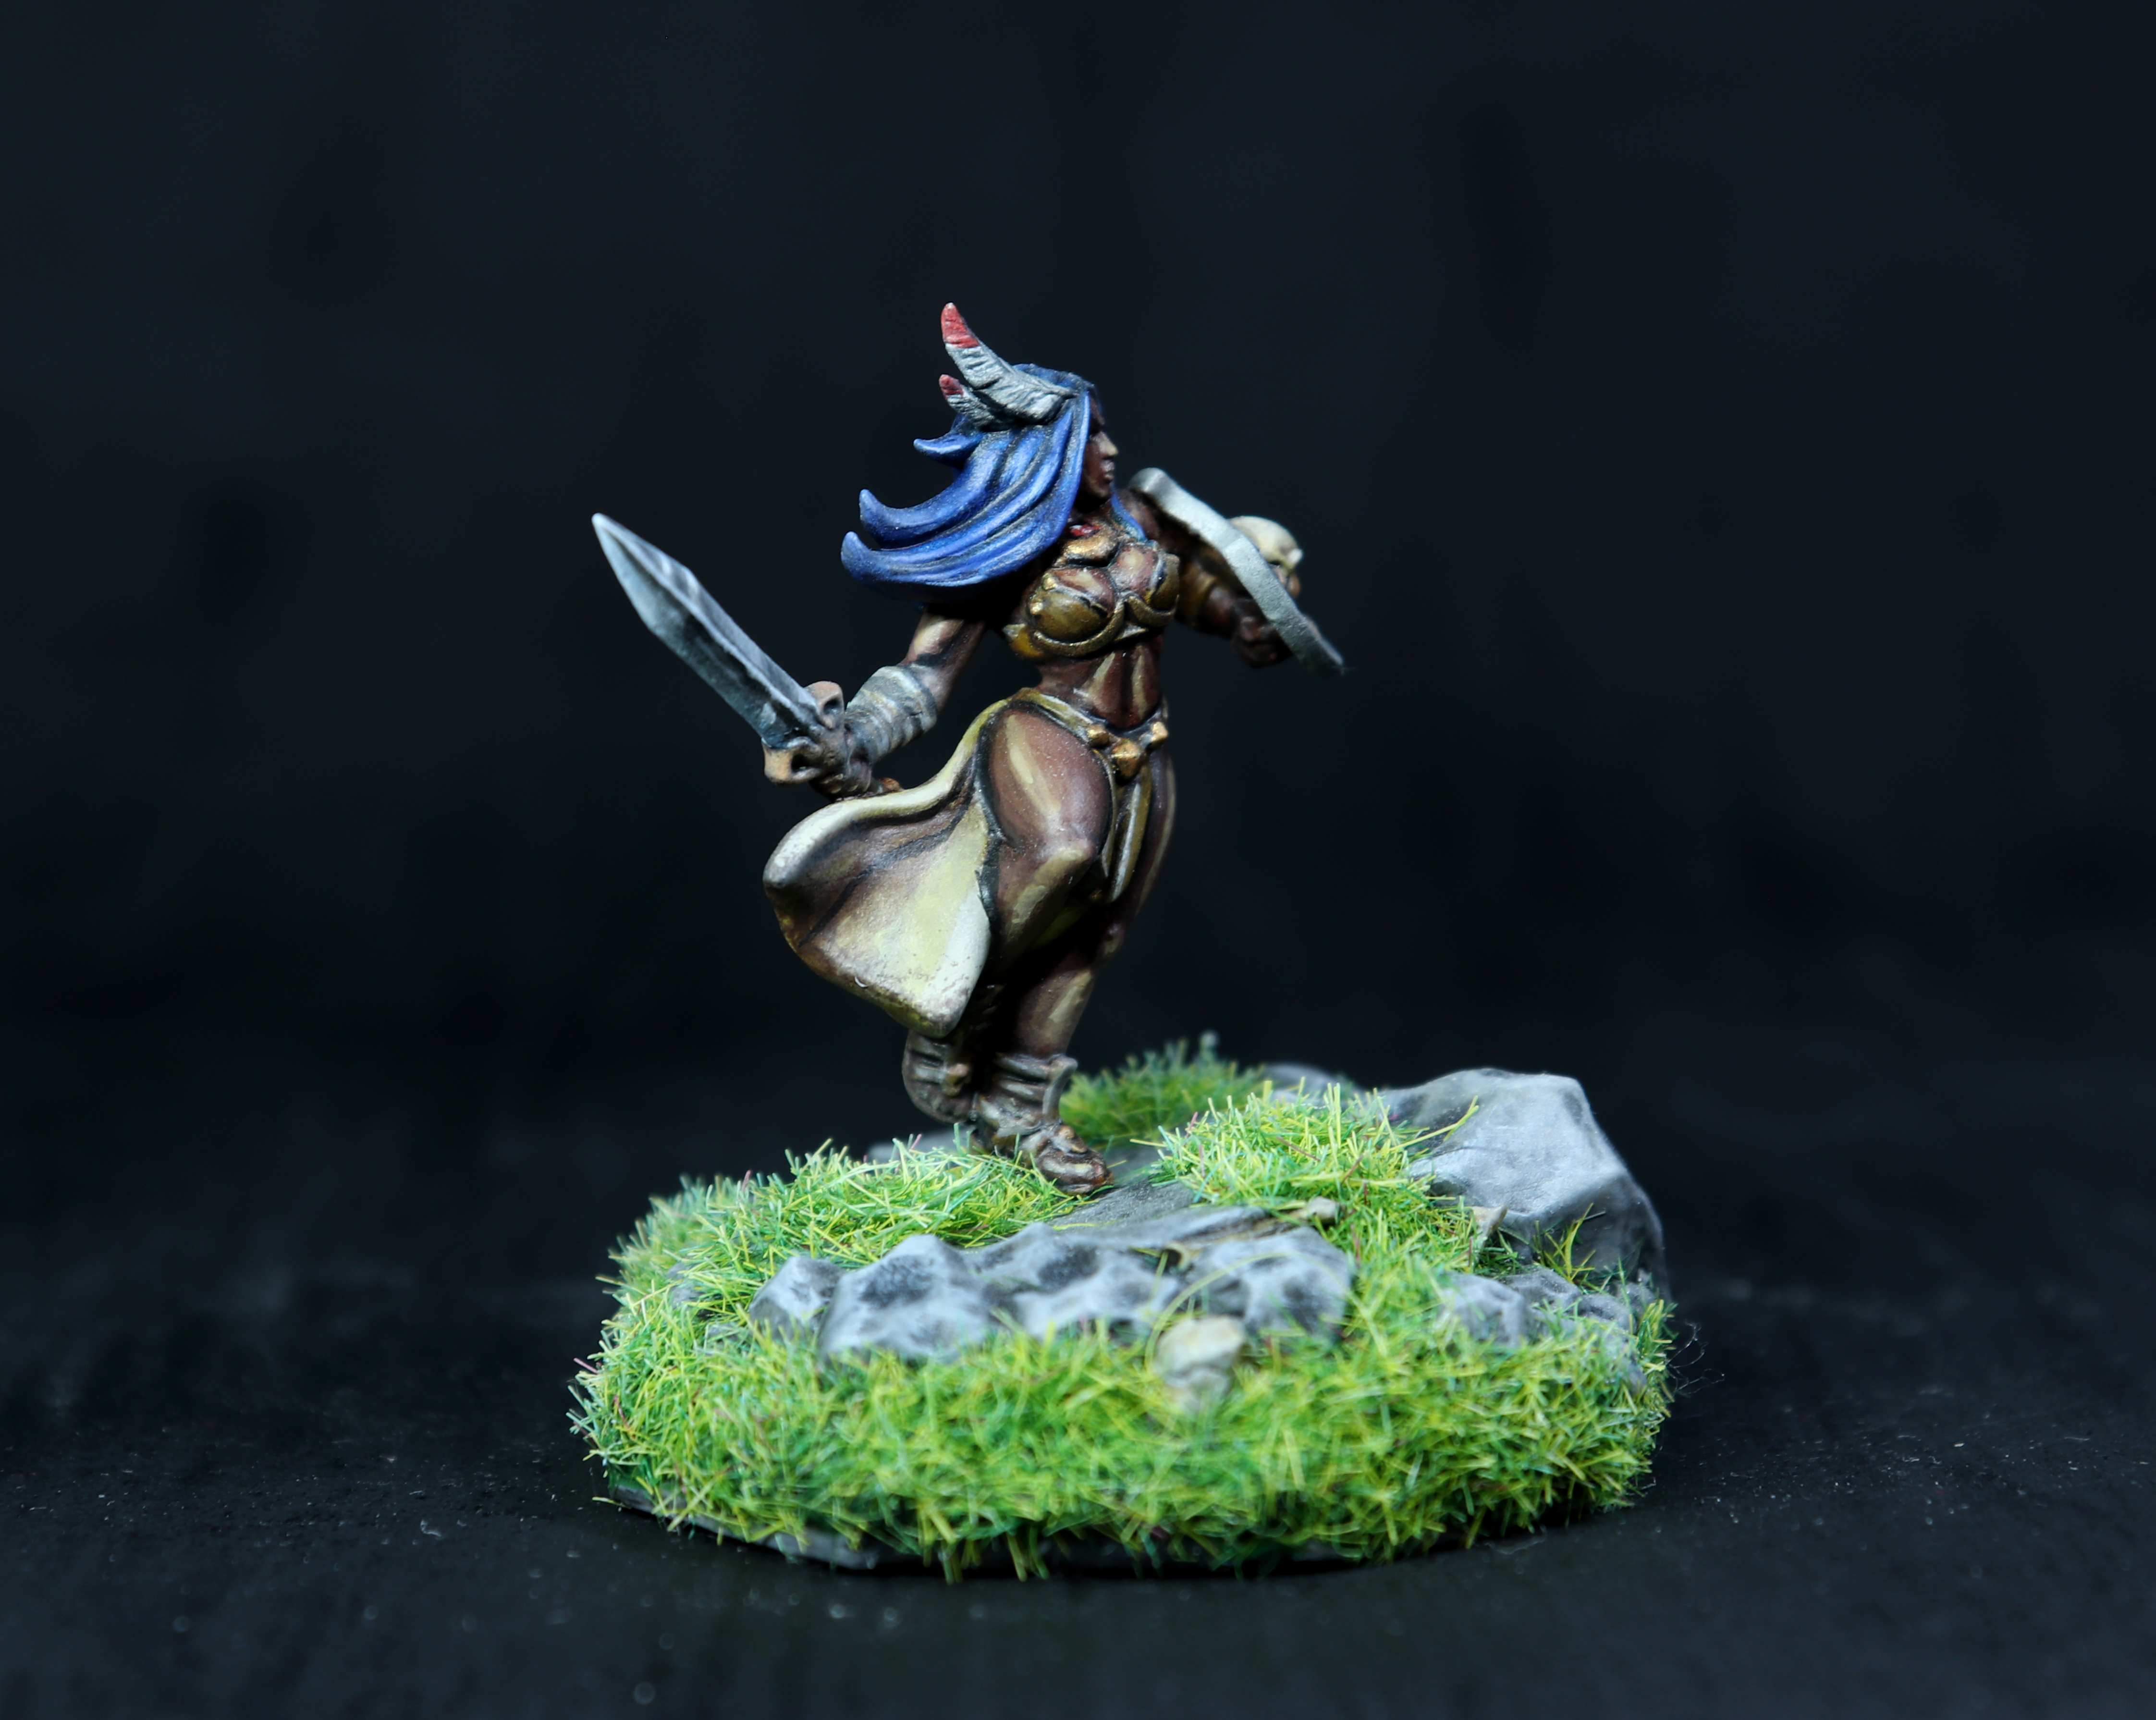 3D Printable Amazon Warrior from AMAZONS! Kickstarter by 